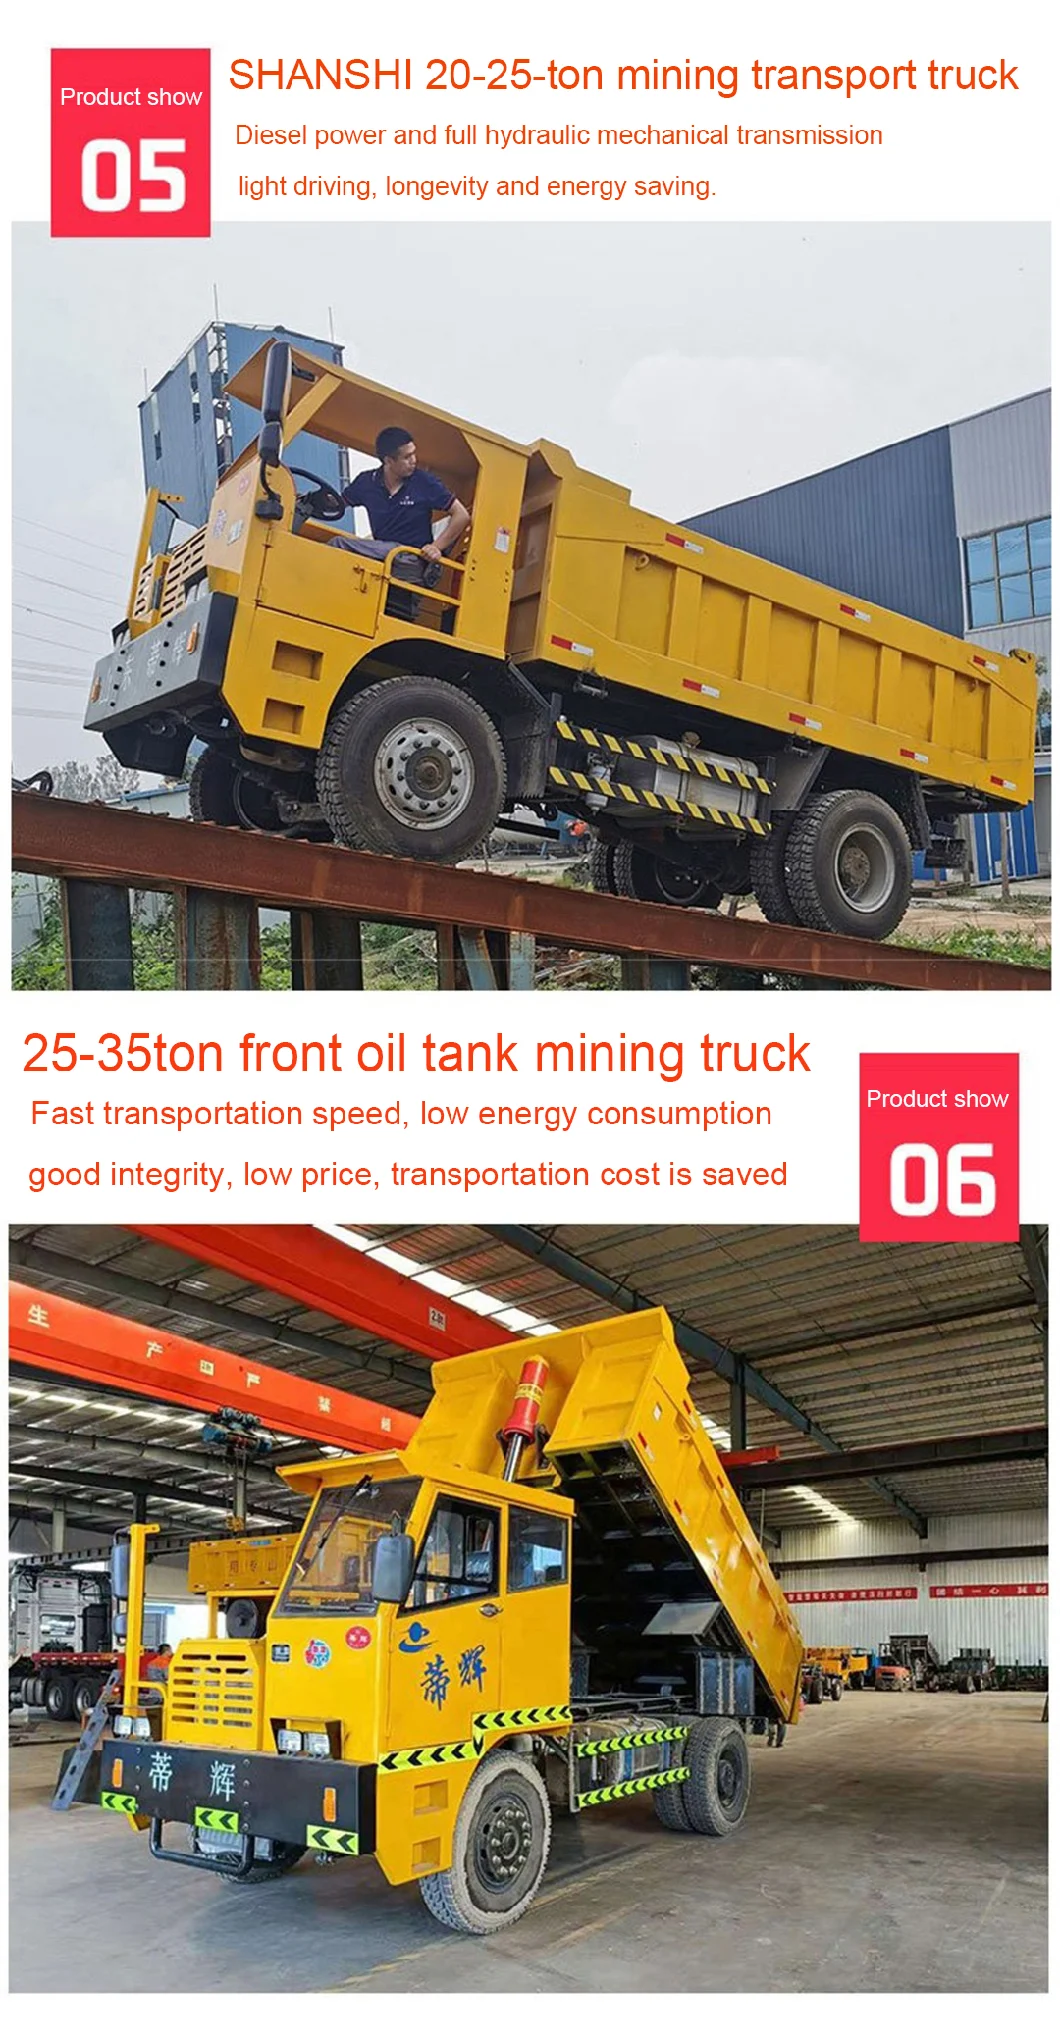 Customized 16ton Mining Dump Truck with Cab for Transport Vehicle Mining Equipment